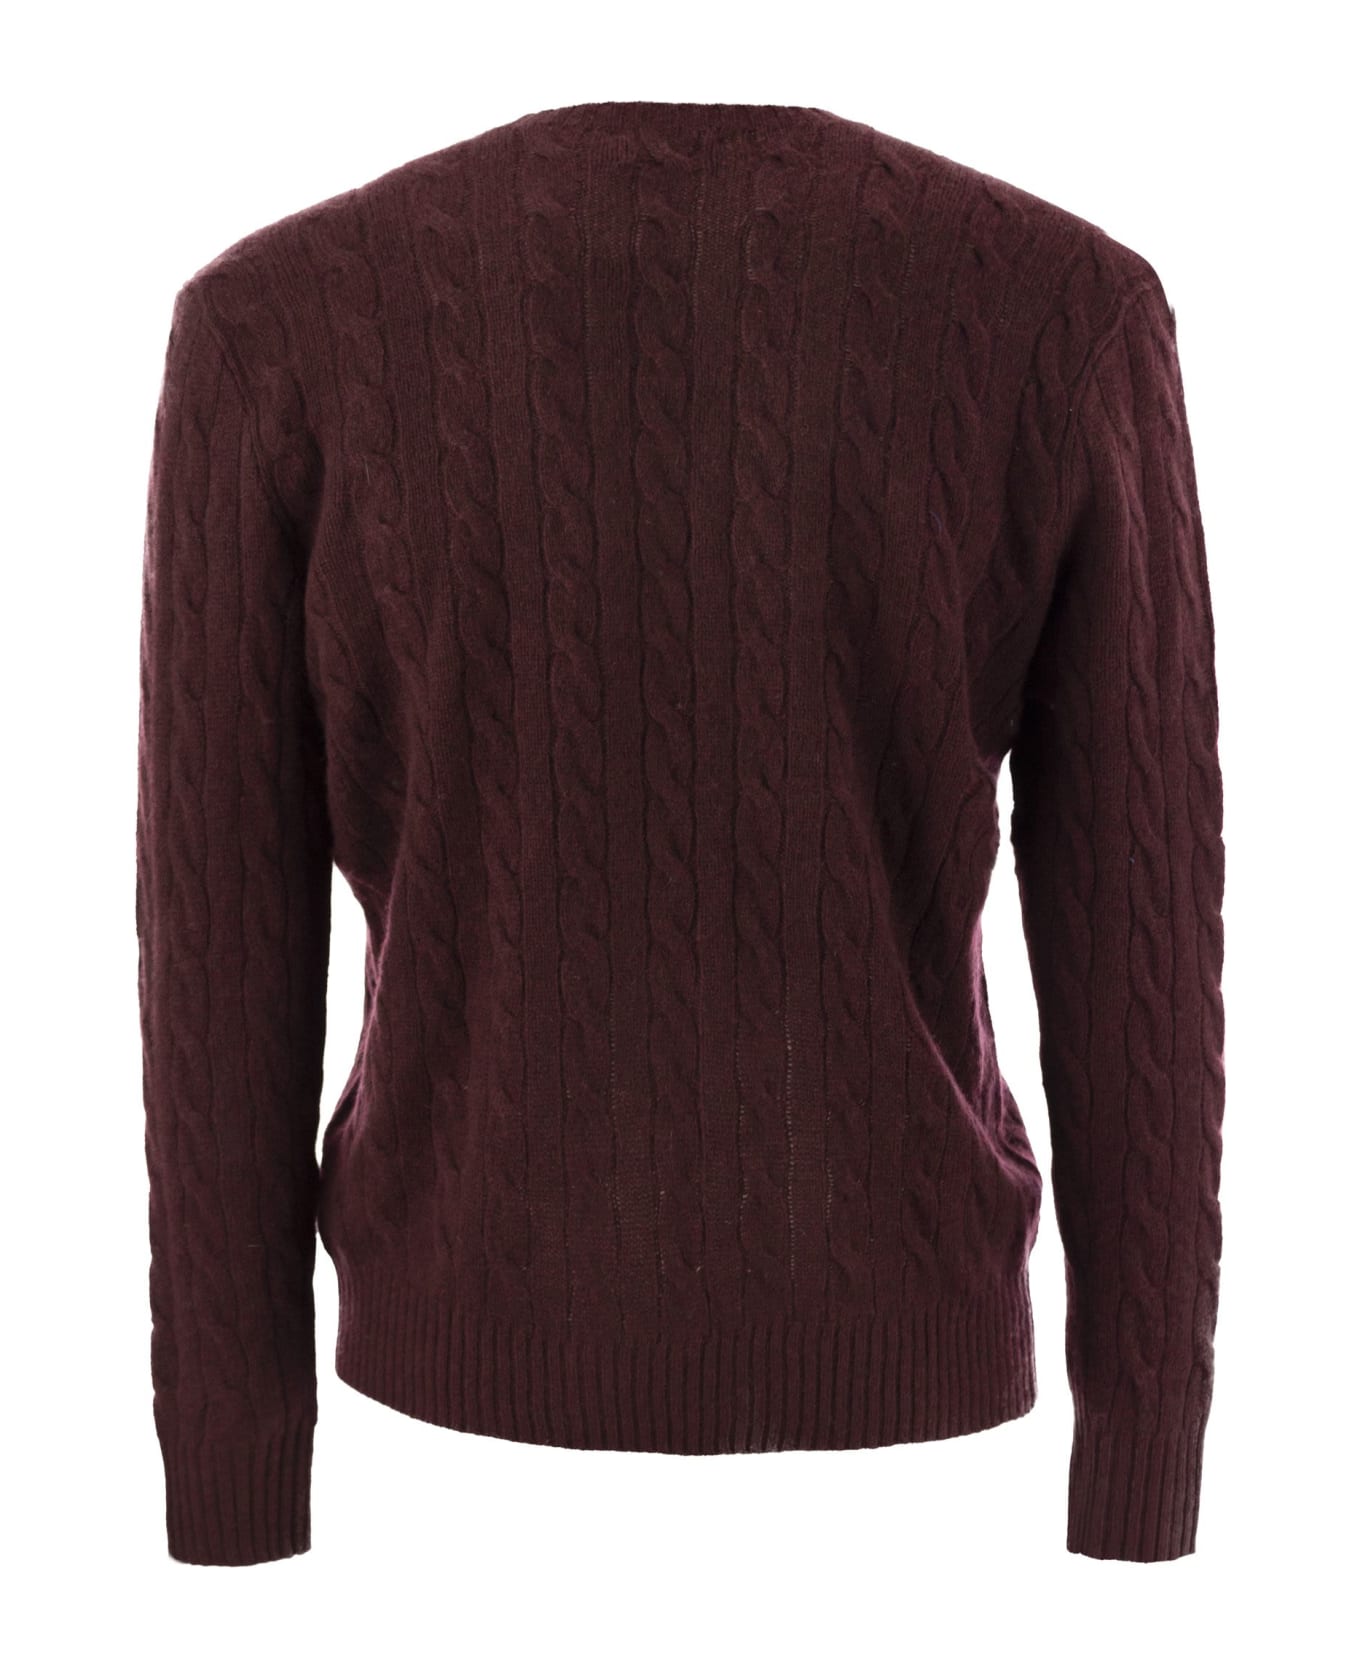 Polo Ralph Lauren Cable Knit Sweater - Burgundy